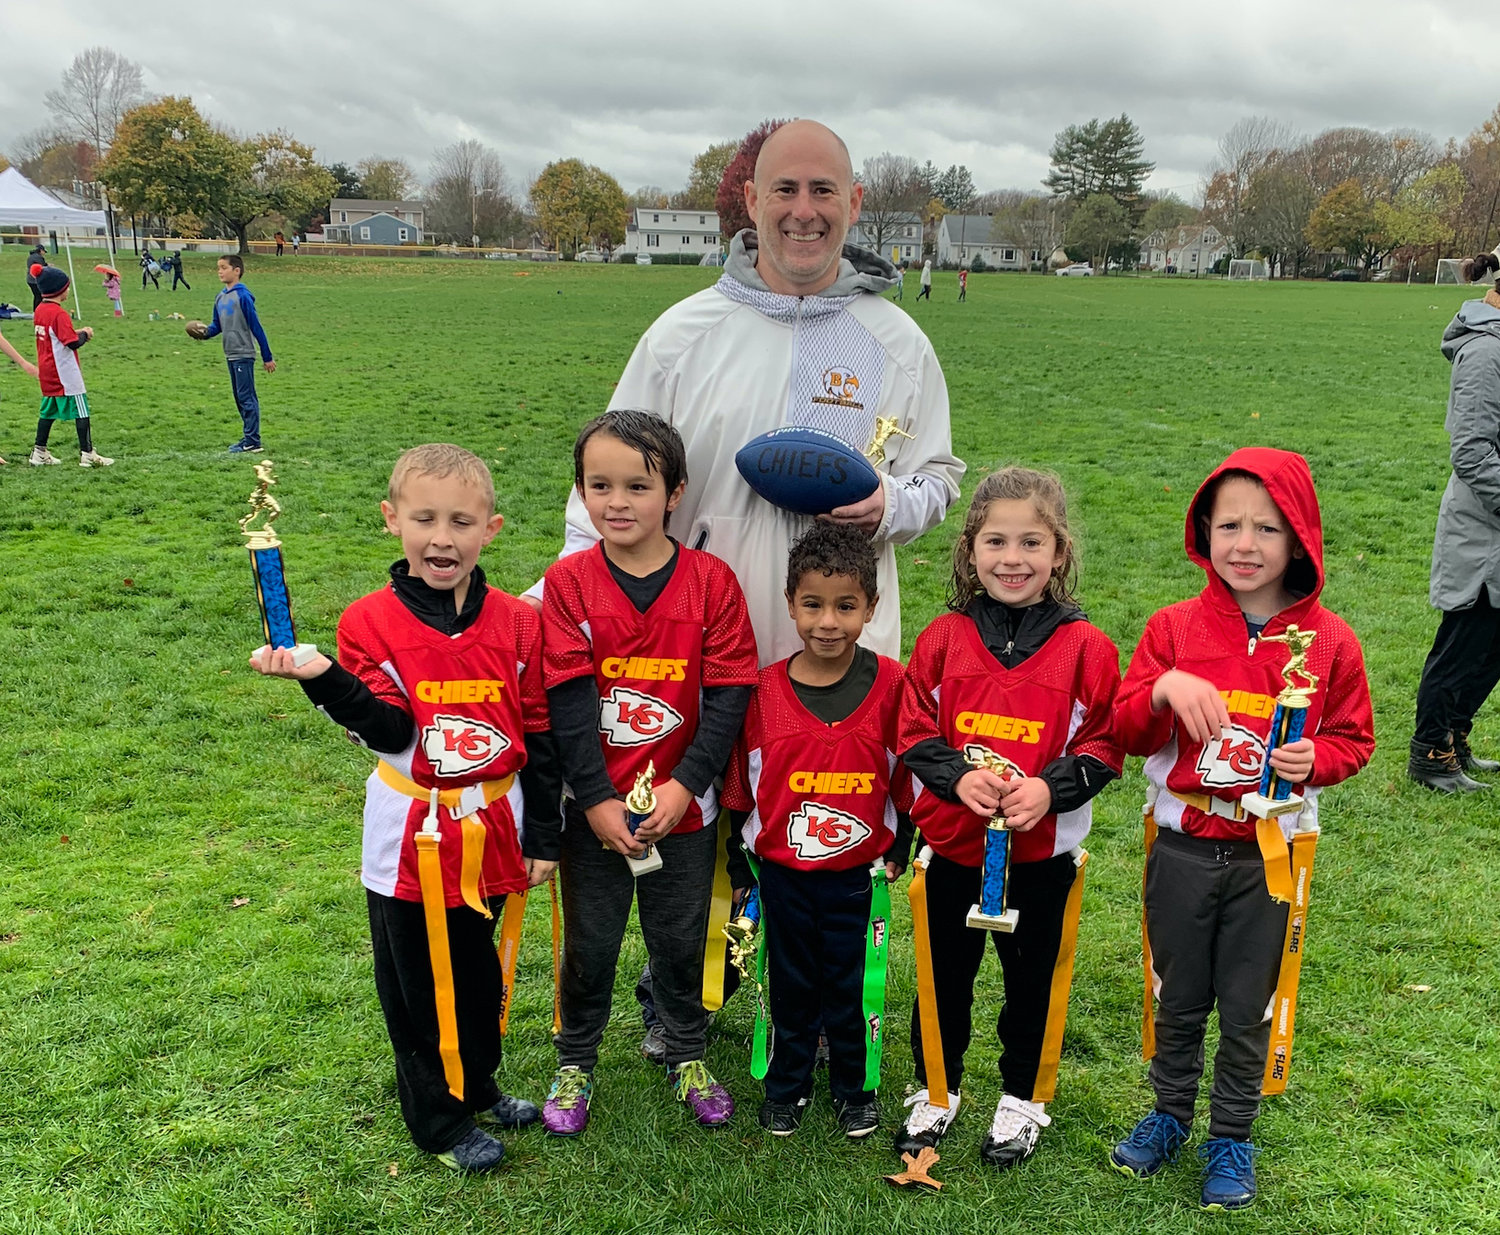 Coach Drew Genetti stands with his 6U Chiefs, after they defeated the Broncos in the division finals.